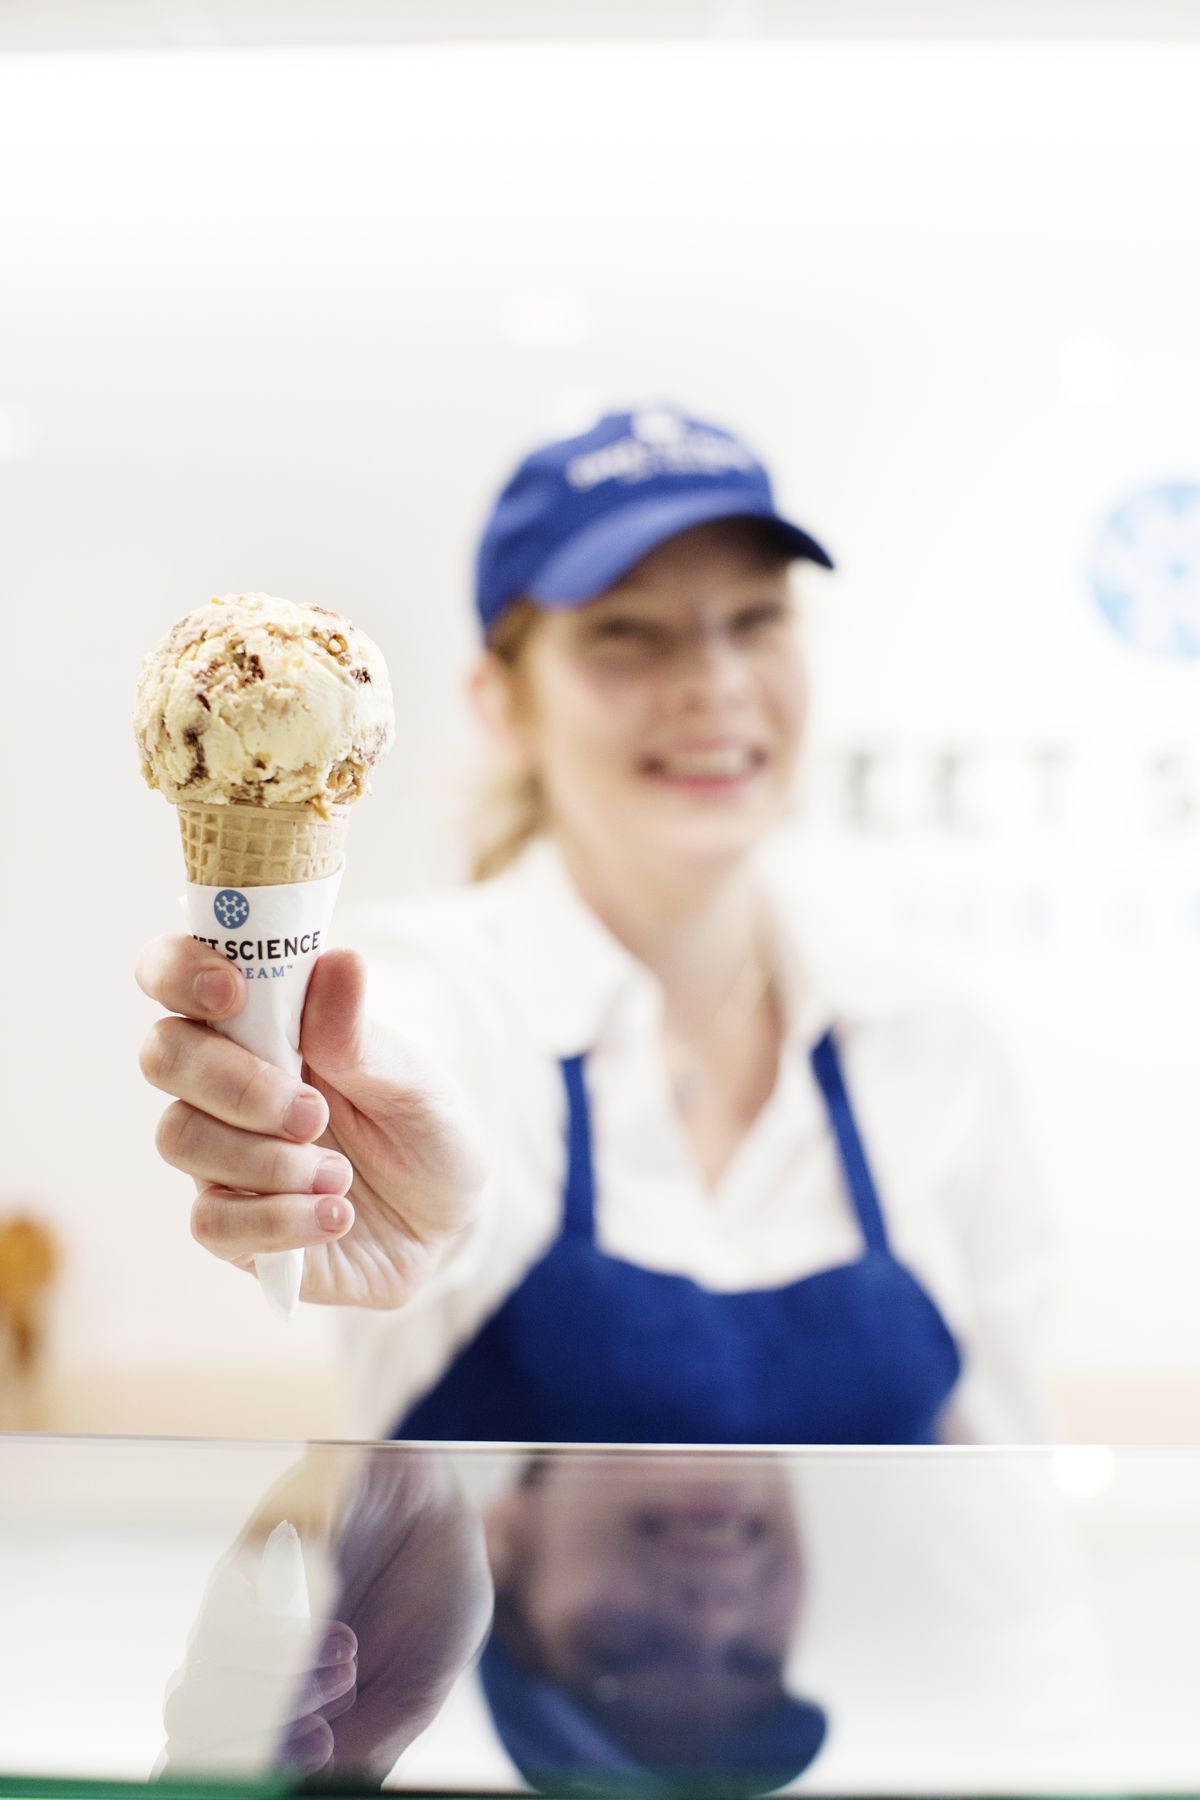 A smiling redhead in a blue Sweet Science shirt and apron, wearing a white shirt, is blurred behind the in-focus ice cream cone she’s holding. It’s a sugar cone with a giant vanilla-colored scoop studded with what looks like caramel pieces